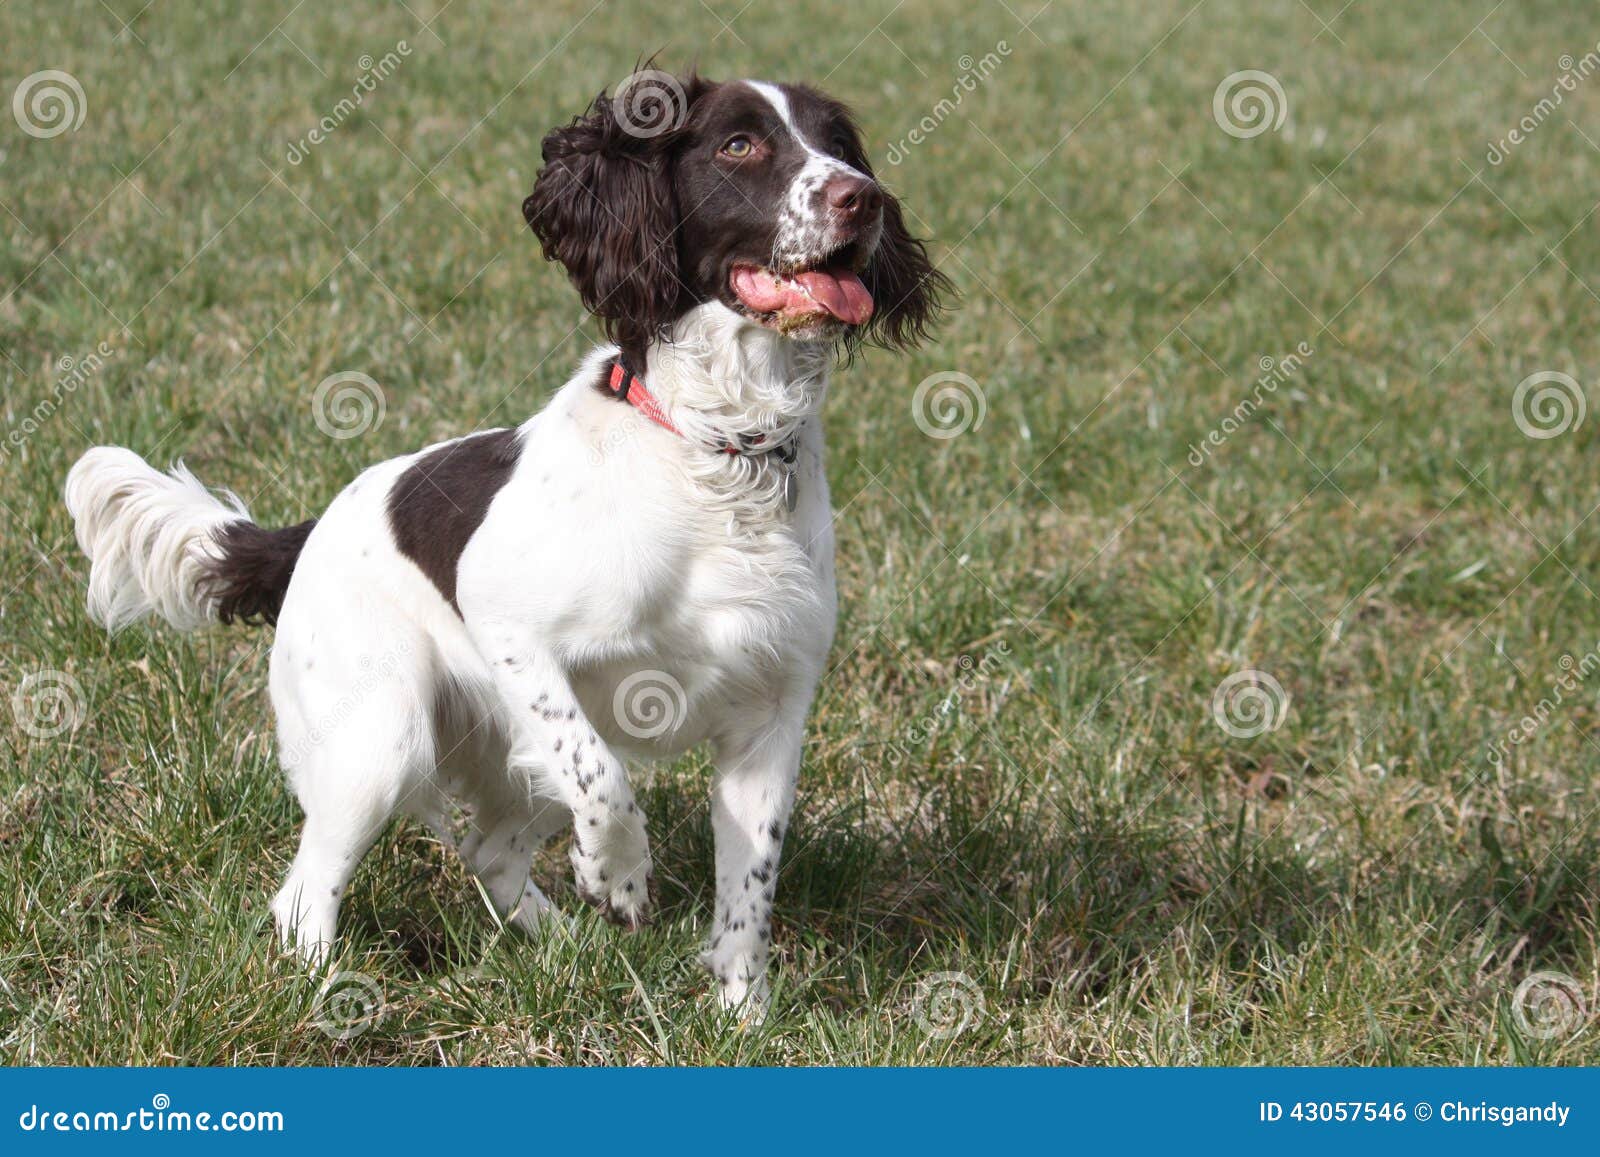 a working type english springer spaniel pet gundog waiting patiently on a shoot